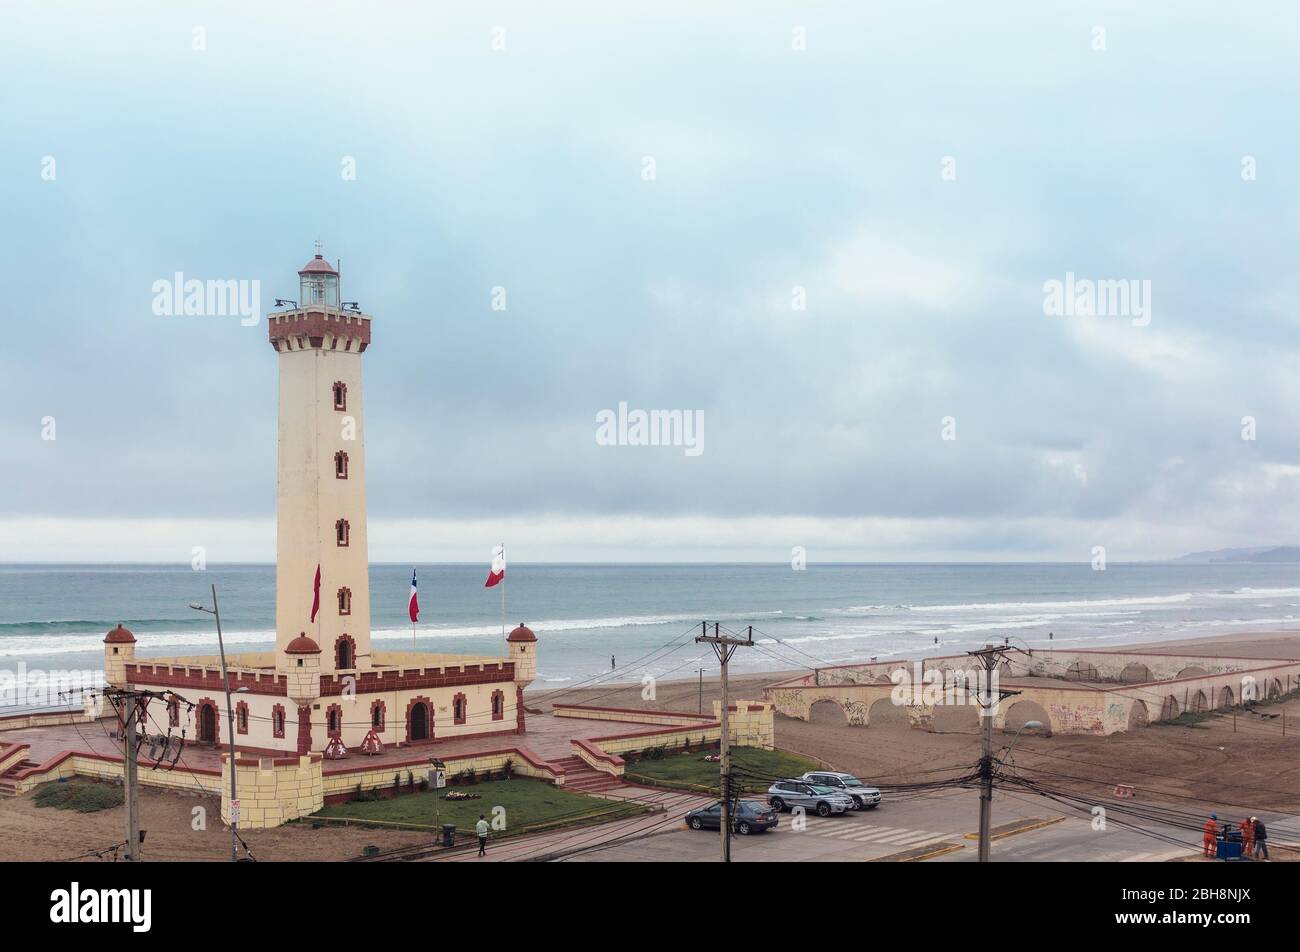 LA SERENA, CHILE - NOVEMBER 7, 2016: Panoramic view of the Monumental Lighthouse of La Serena. Lighthouse is one of the most popular tourist attractio Stock Photo